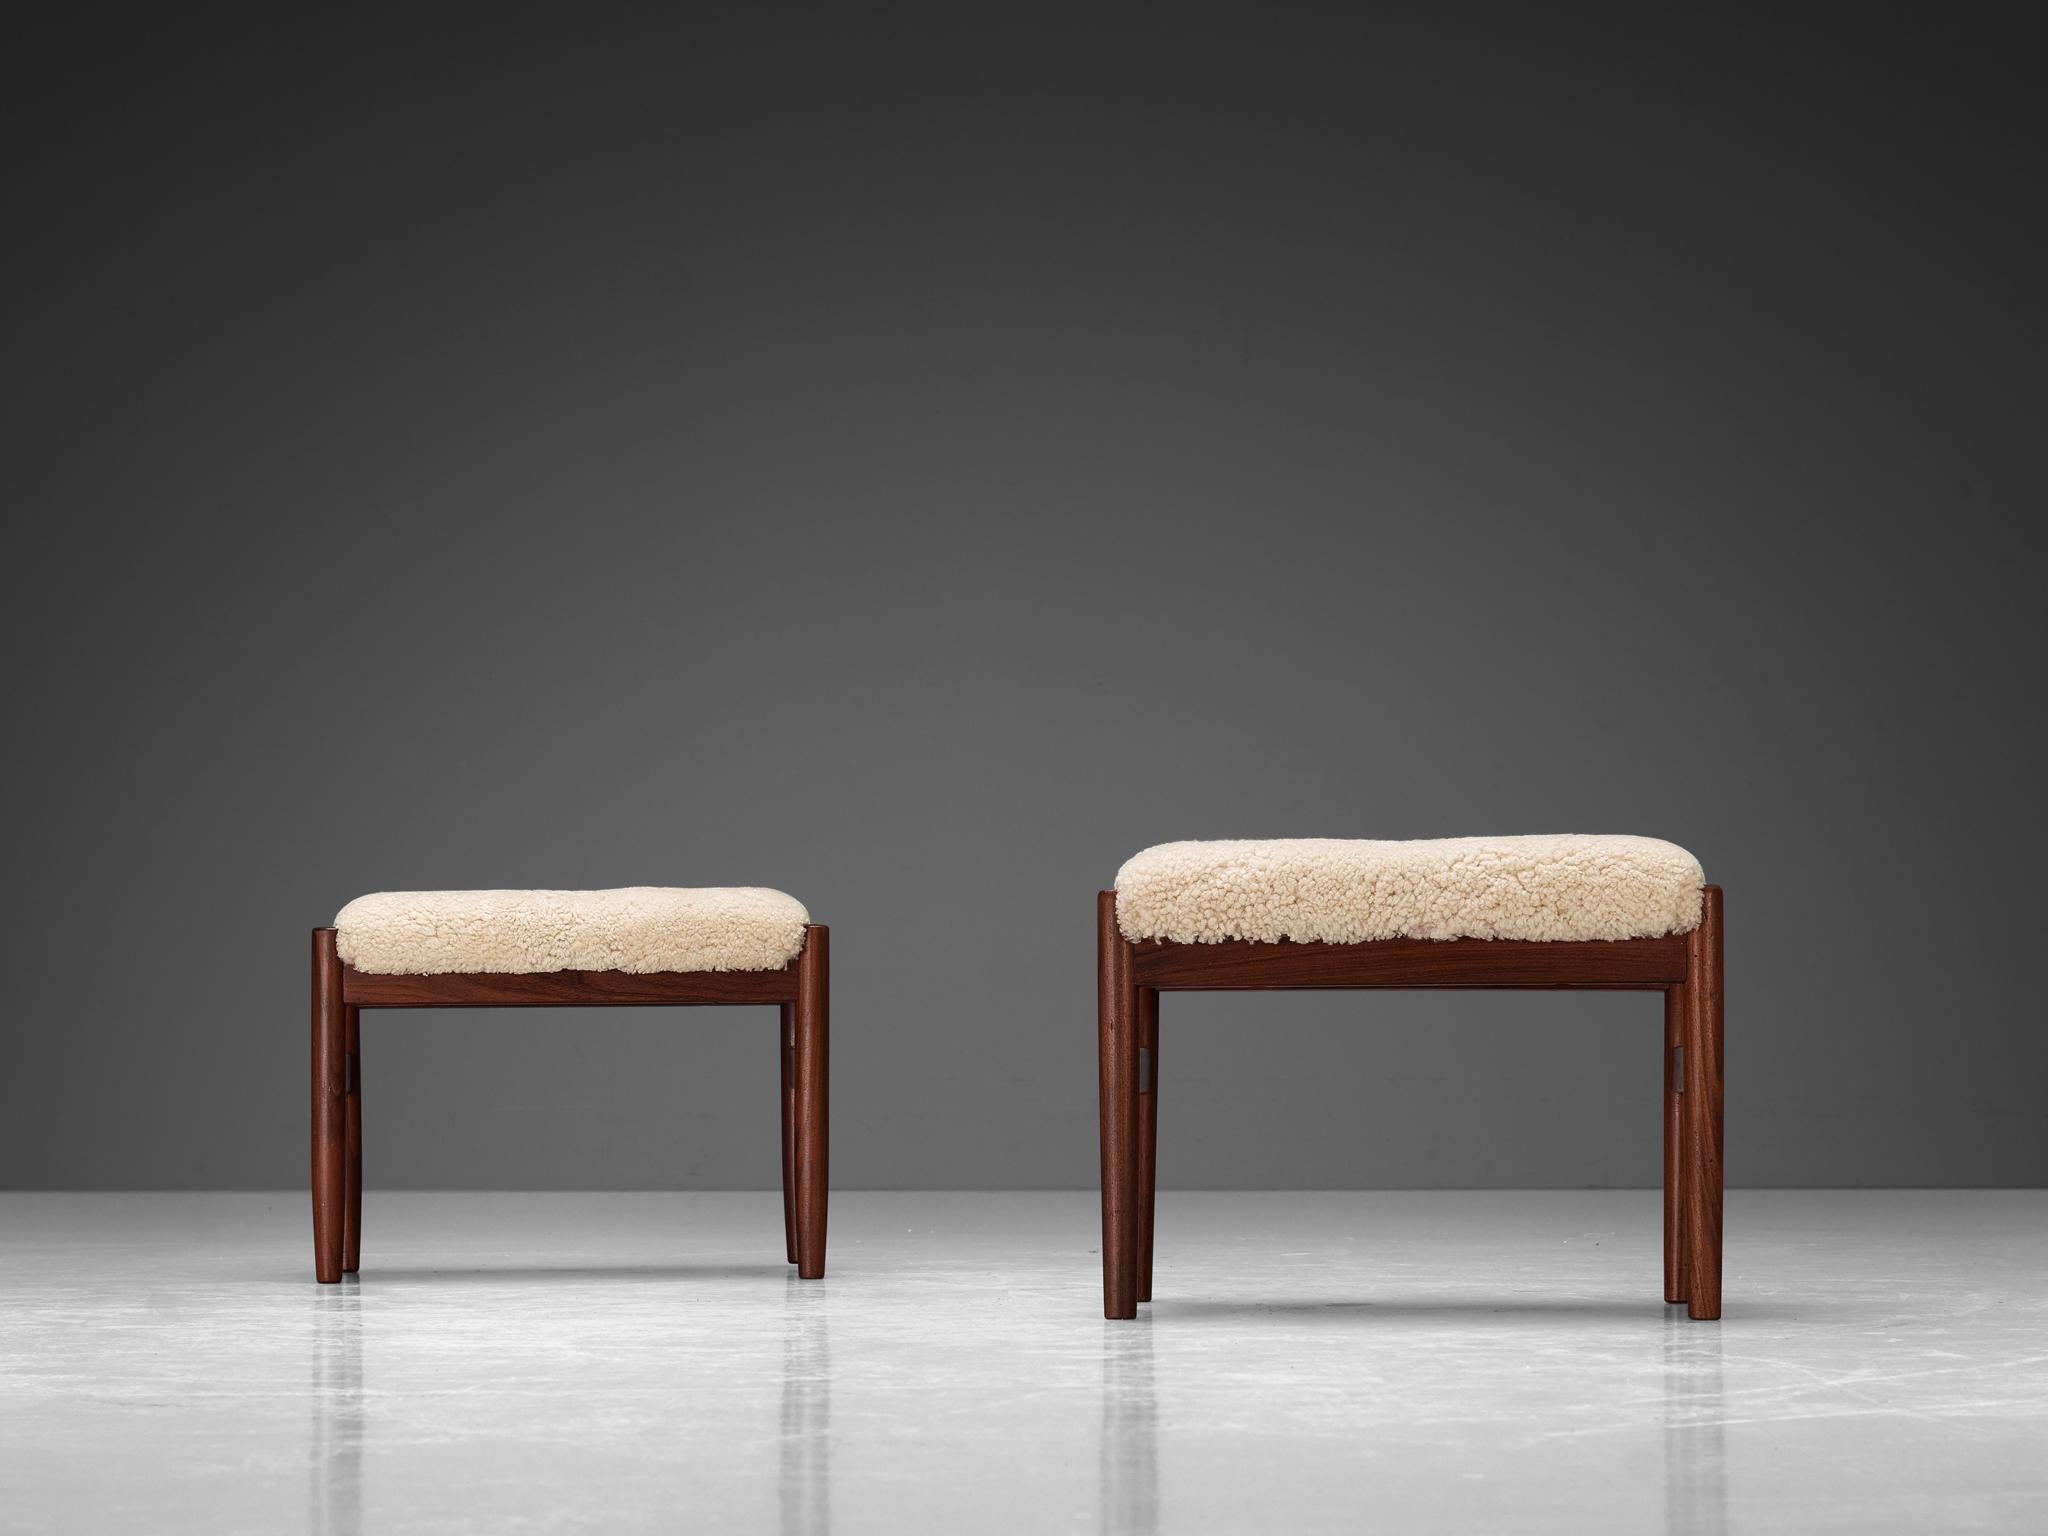 Scandinavian Stools in Teak and Shearling Upholstery  In Good Condition For Sale In Waalwijk, NL